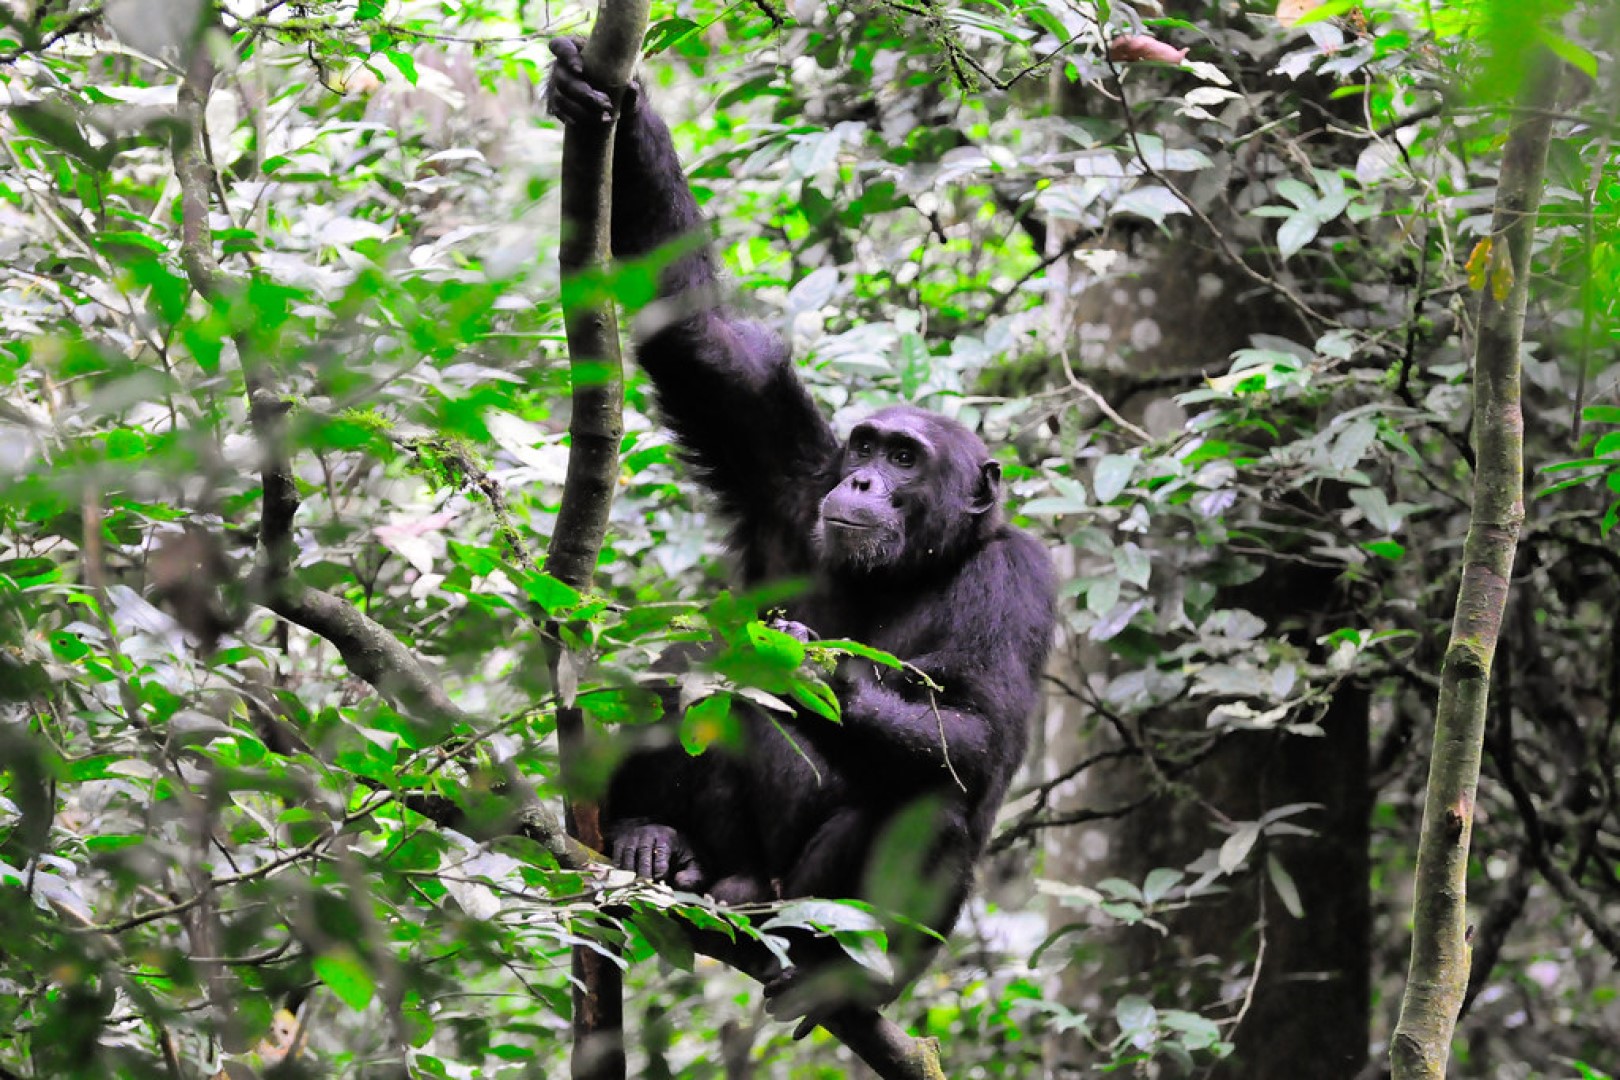 A closer look at a chimpanzee in Kibale National Park